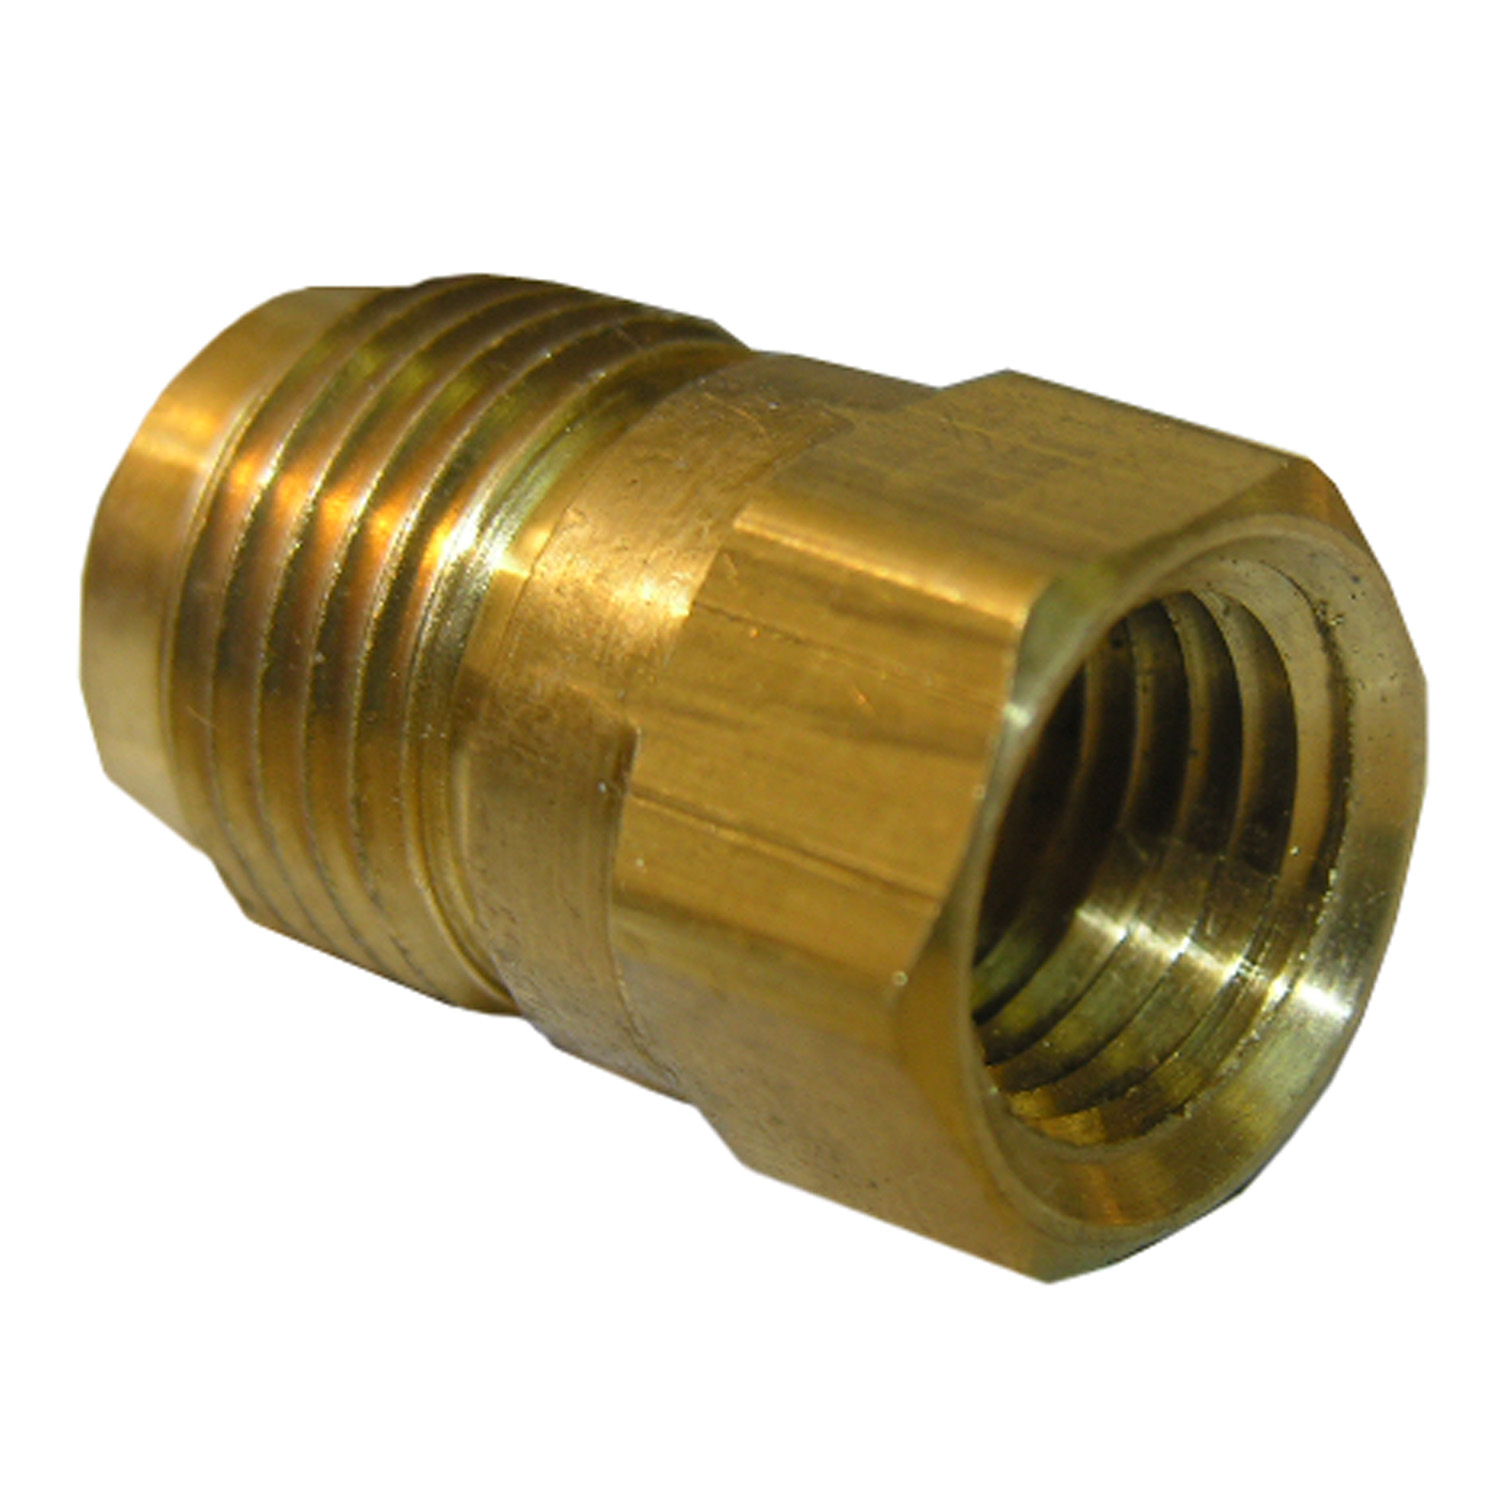 17-4629 Pipe Adapter, 3/8 x 1/4 in, Male Flare x FPT, Brass, 900 psi Pressure